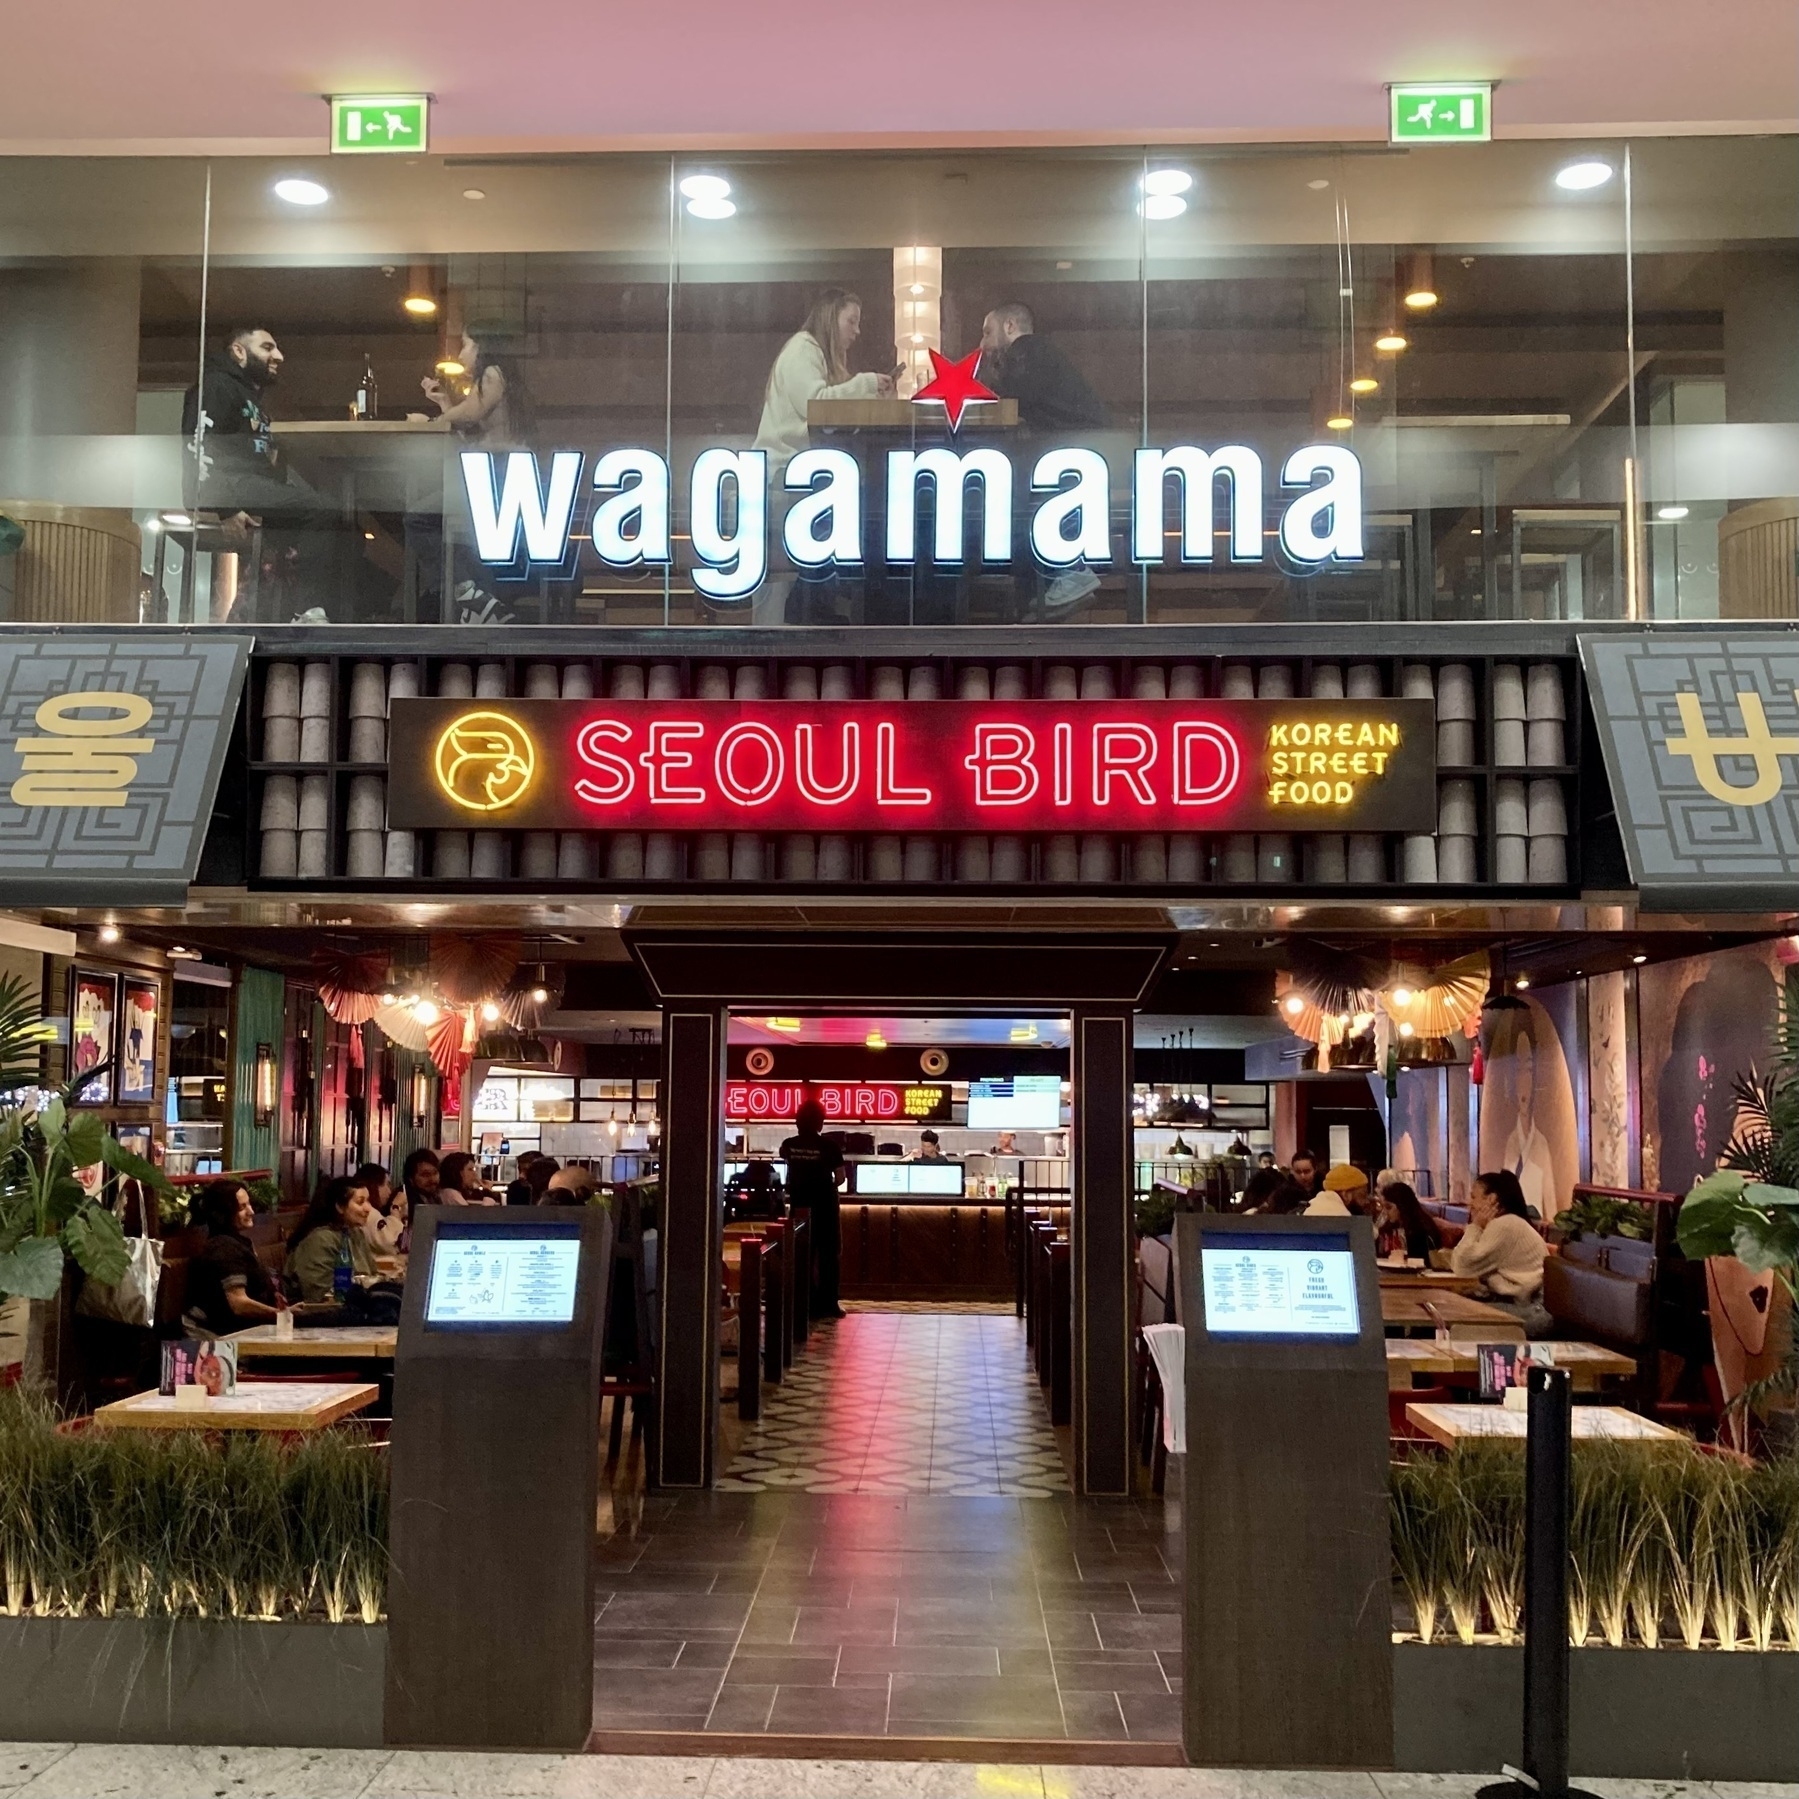 Seoul Bird fried chicken restaurant entrance, Wagamama noodle restaurant above, Jubilee place, Canary Wharf, London